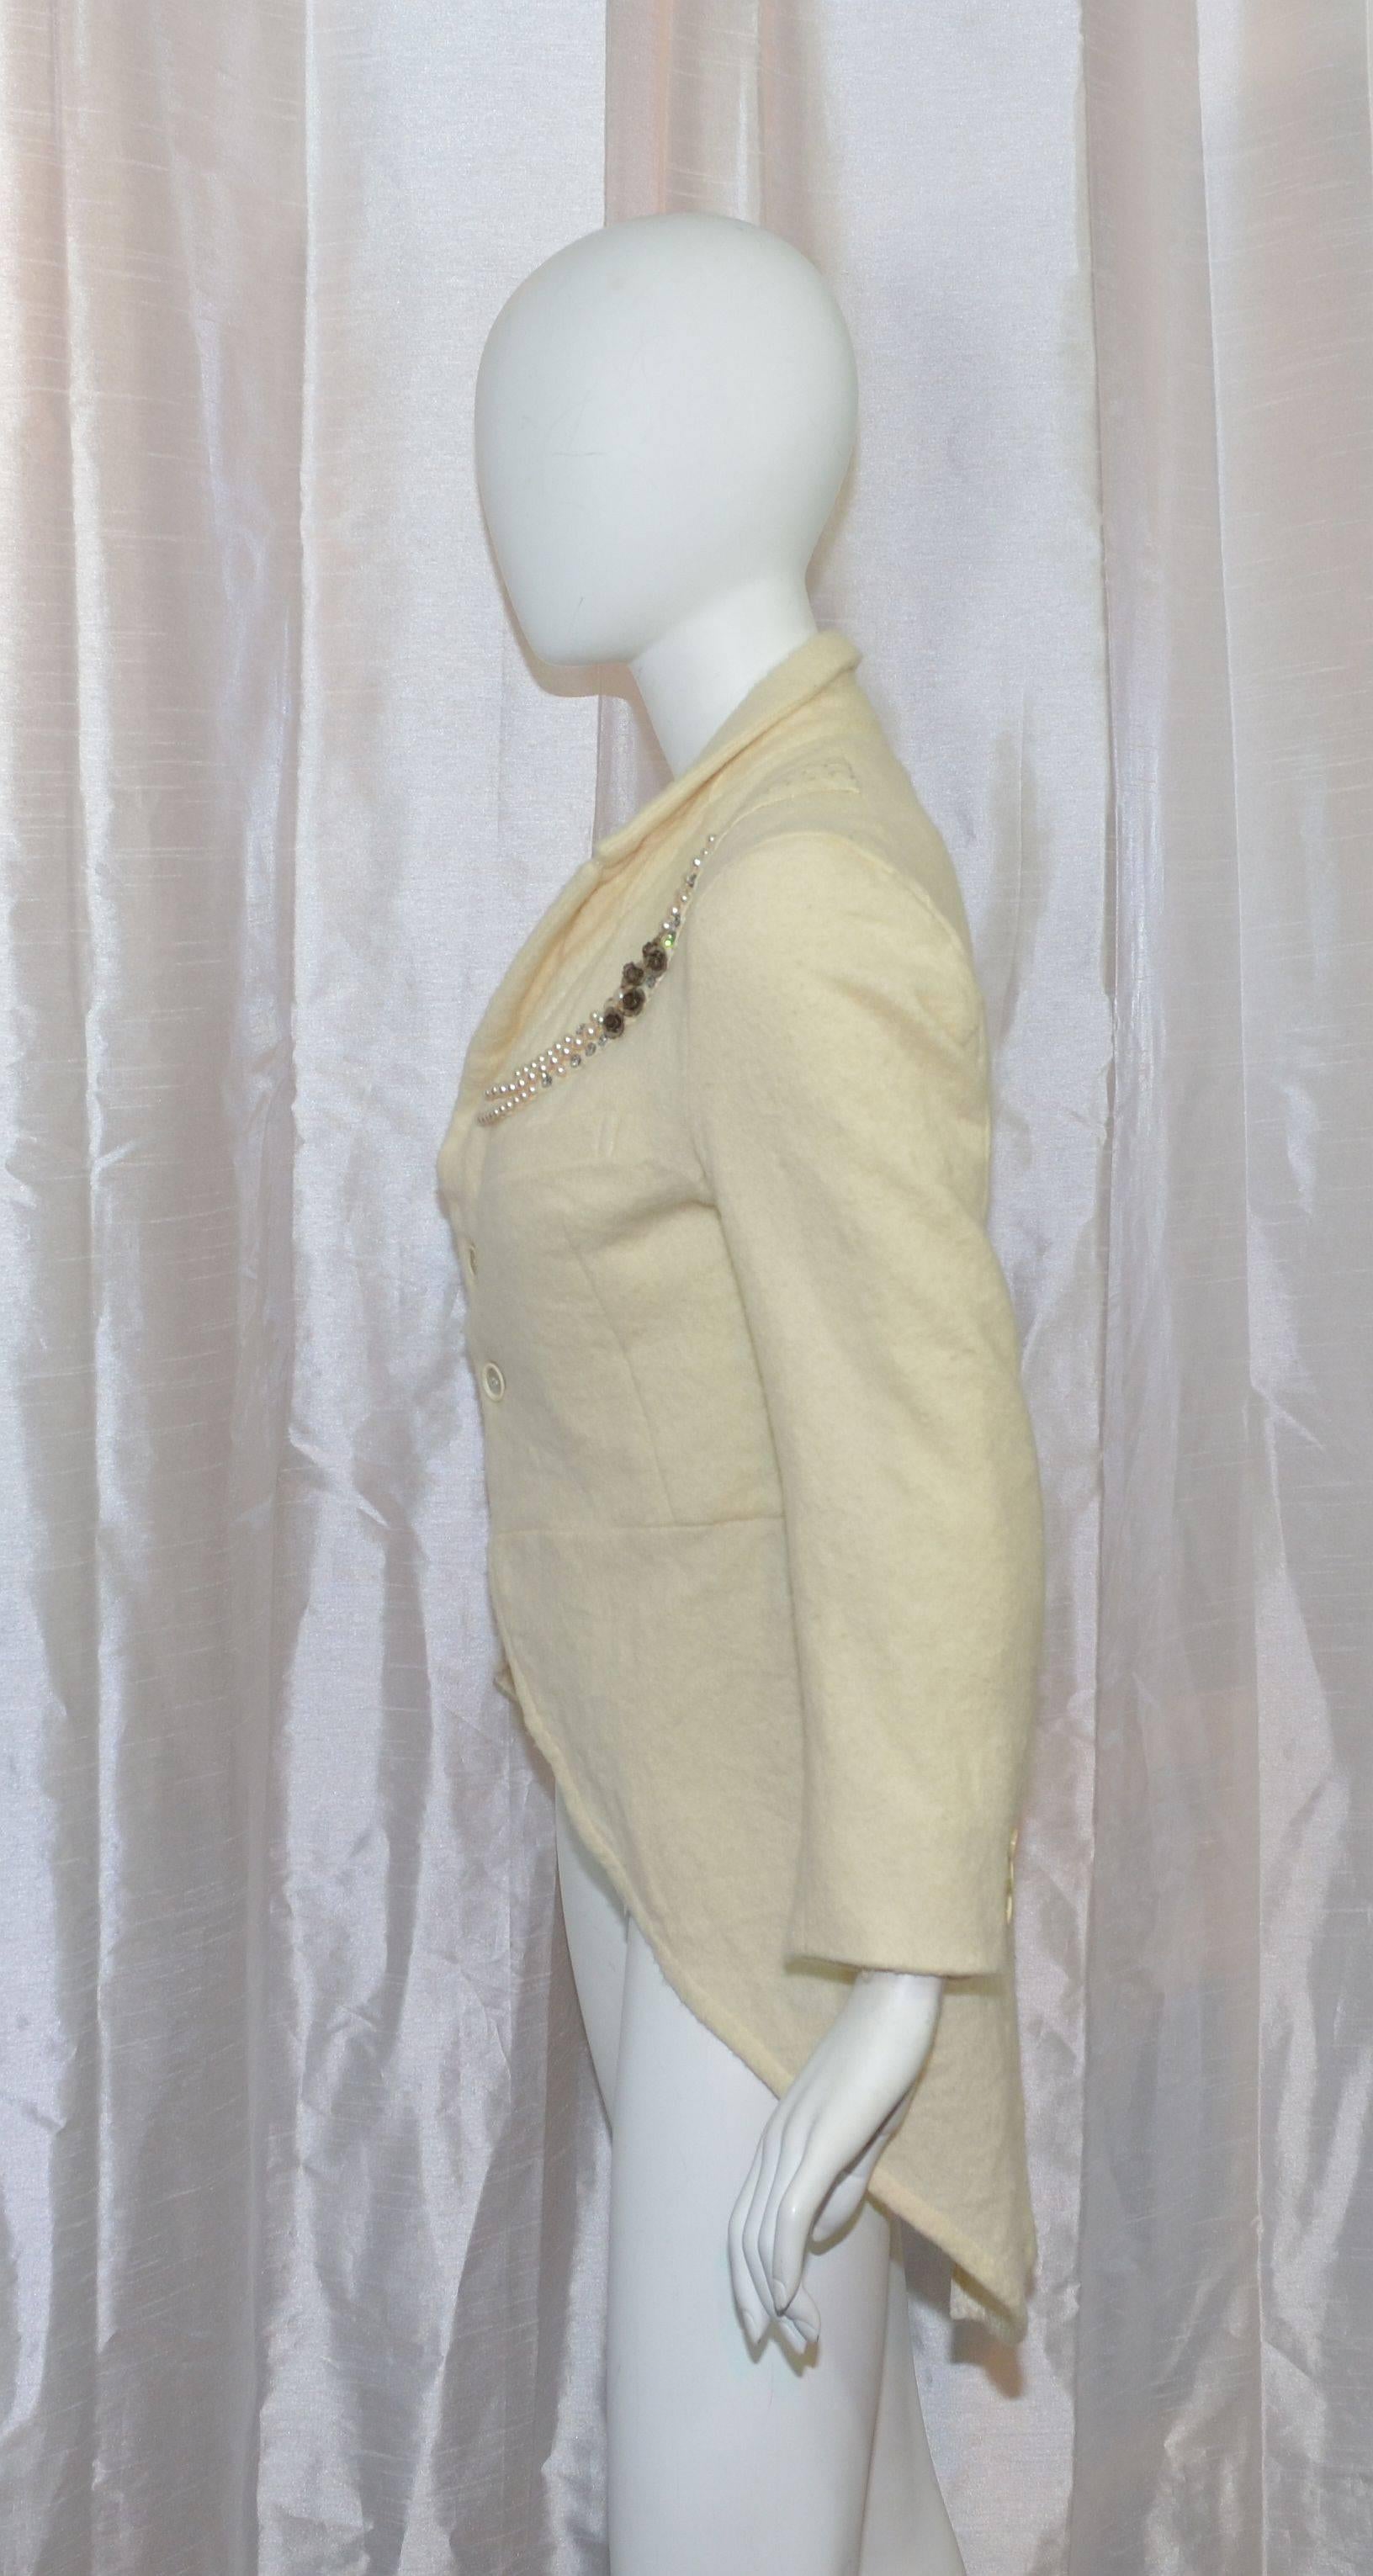 Comme des Garcons cutaway jacket 2006 Fall/ Winter collection featured in a cream-colored unlined wool fabric, two button closures at the front, one functional pocket at the bust, embellishing along the collar area by avant-grade French jewelry